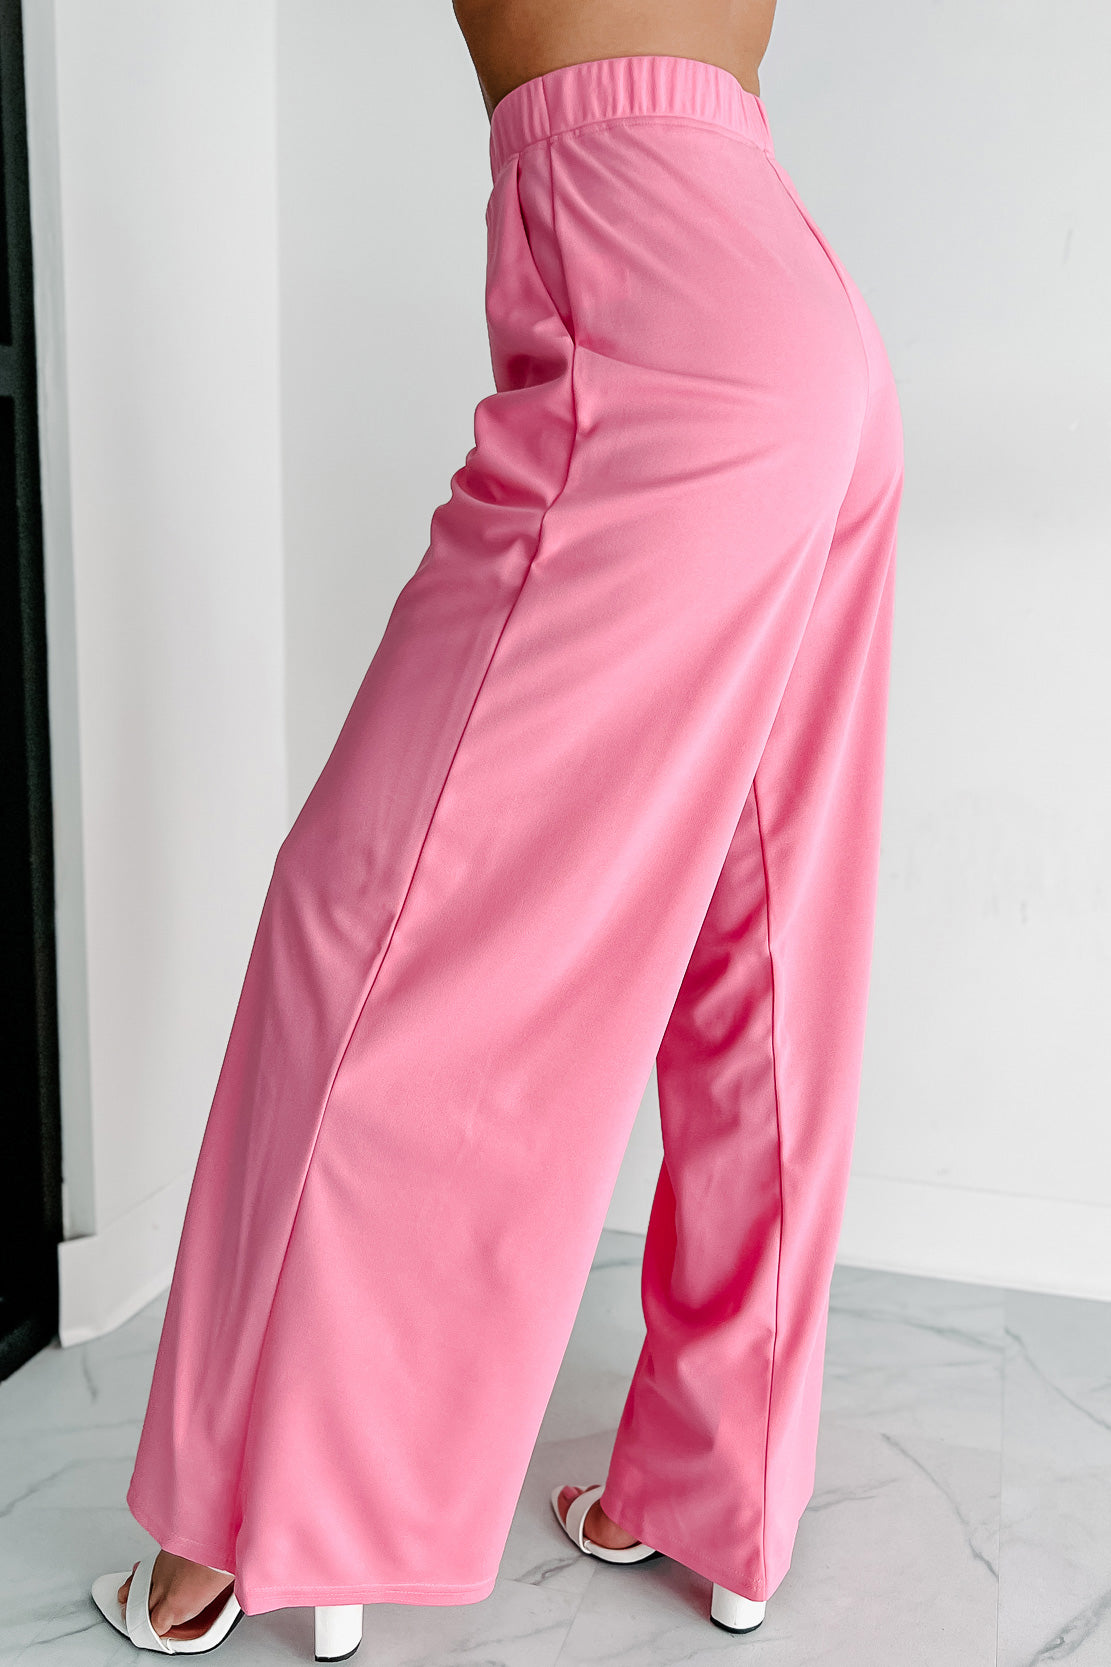 Having a moment with these pink satin pants 💕they'll take you